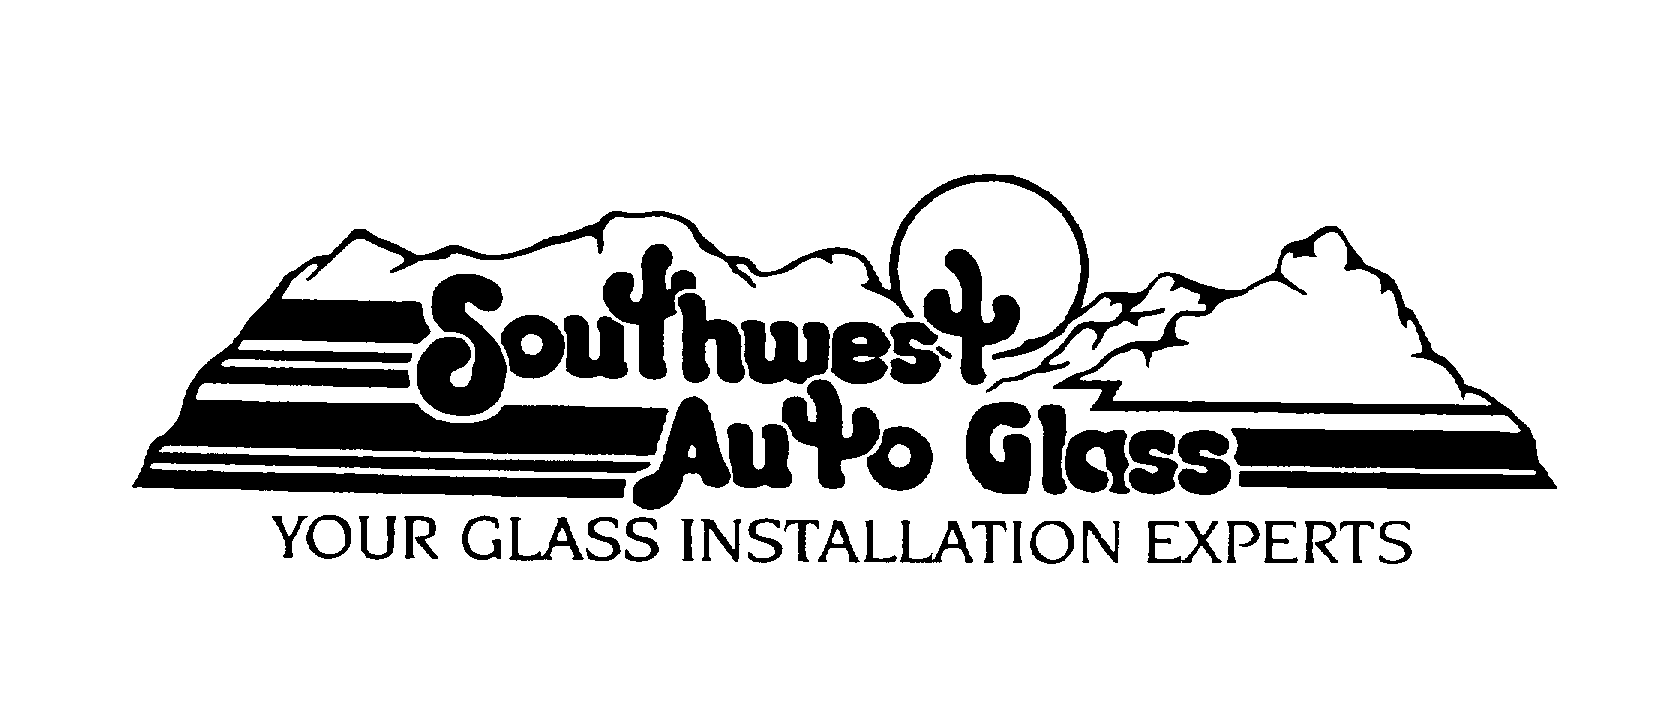 SOUTHWEST AUTO GLASS YOUR GLASS INSTALLATION EXPERTS